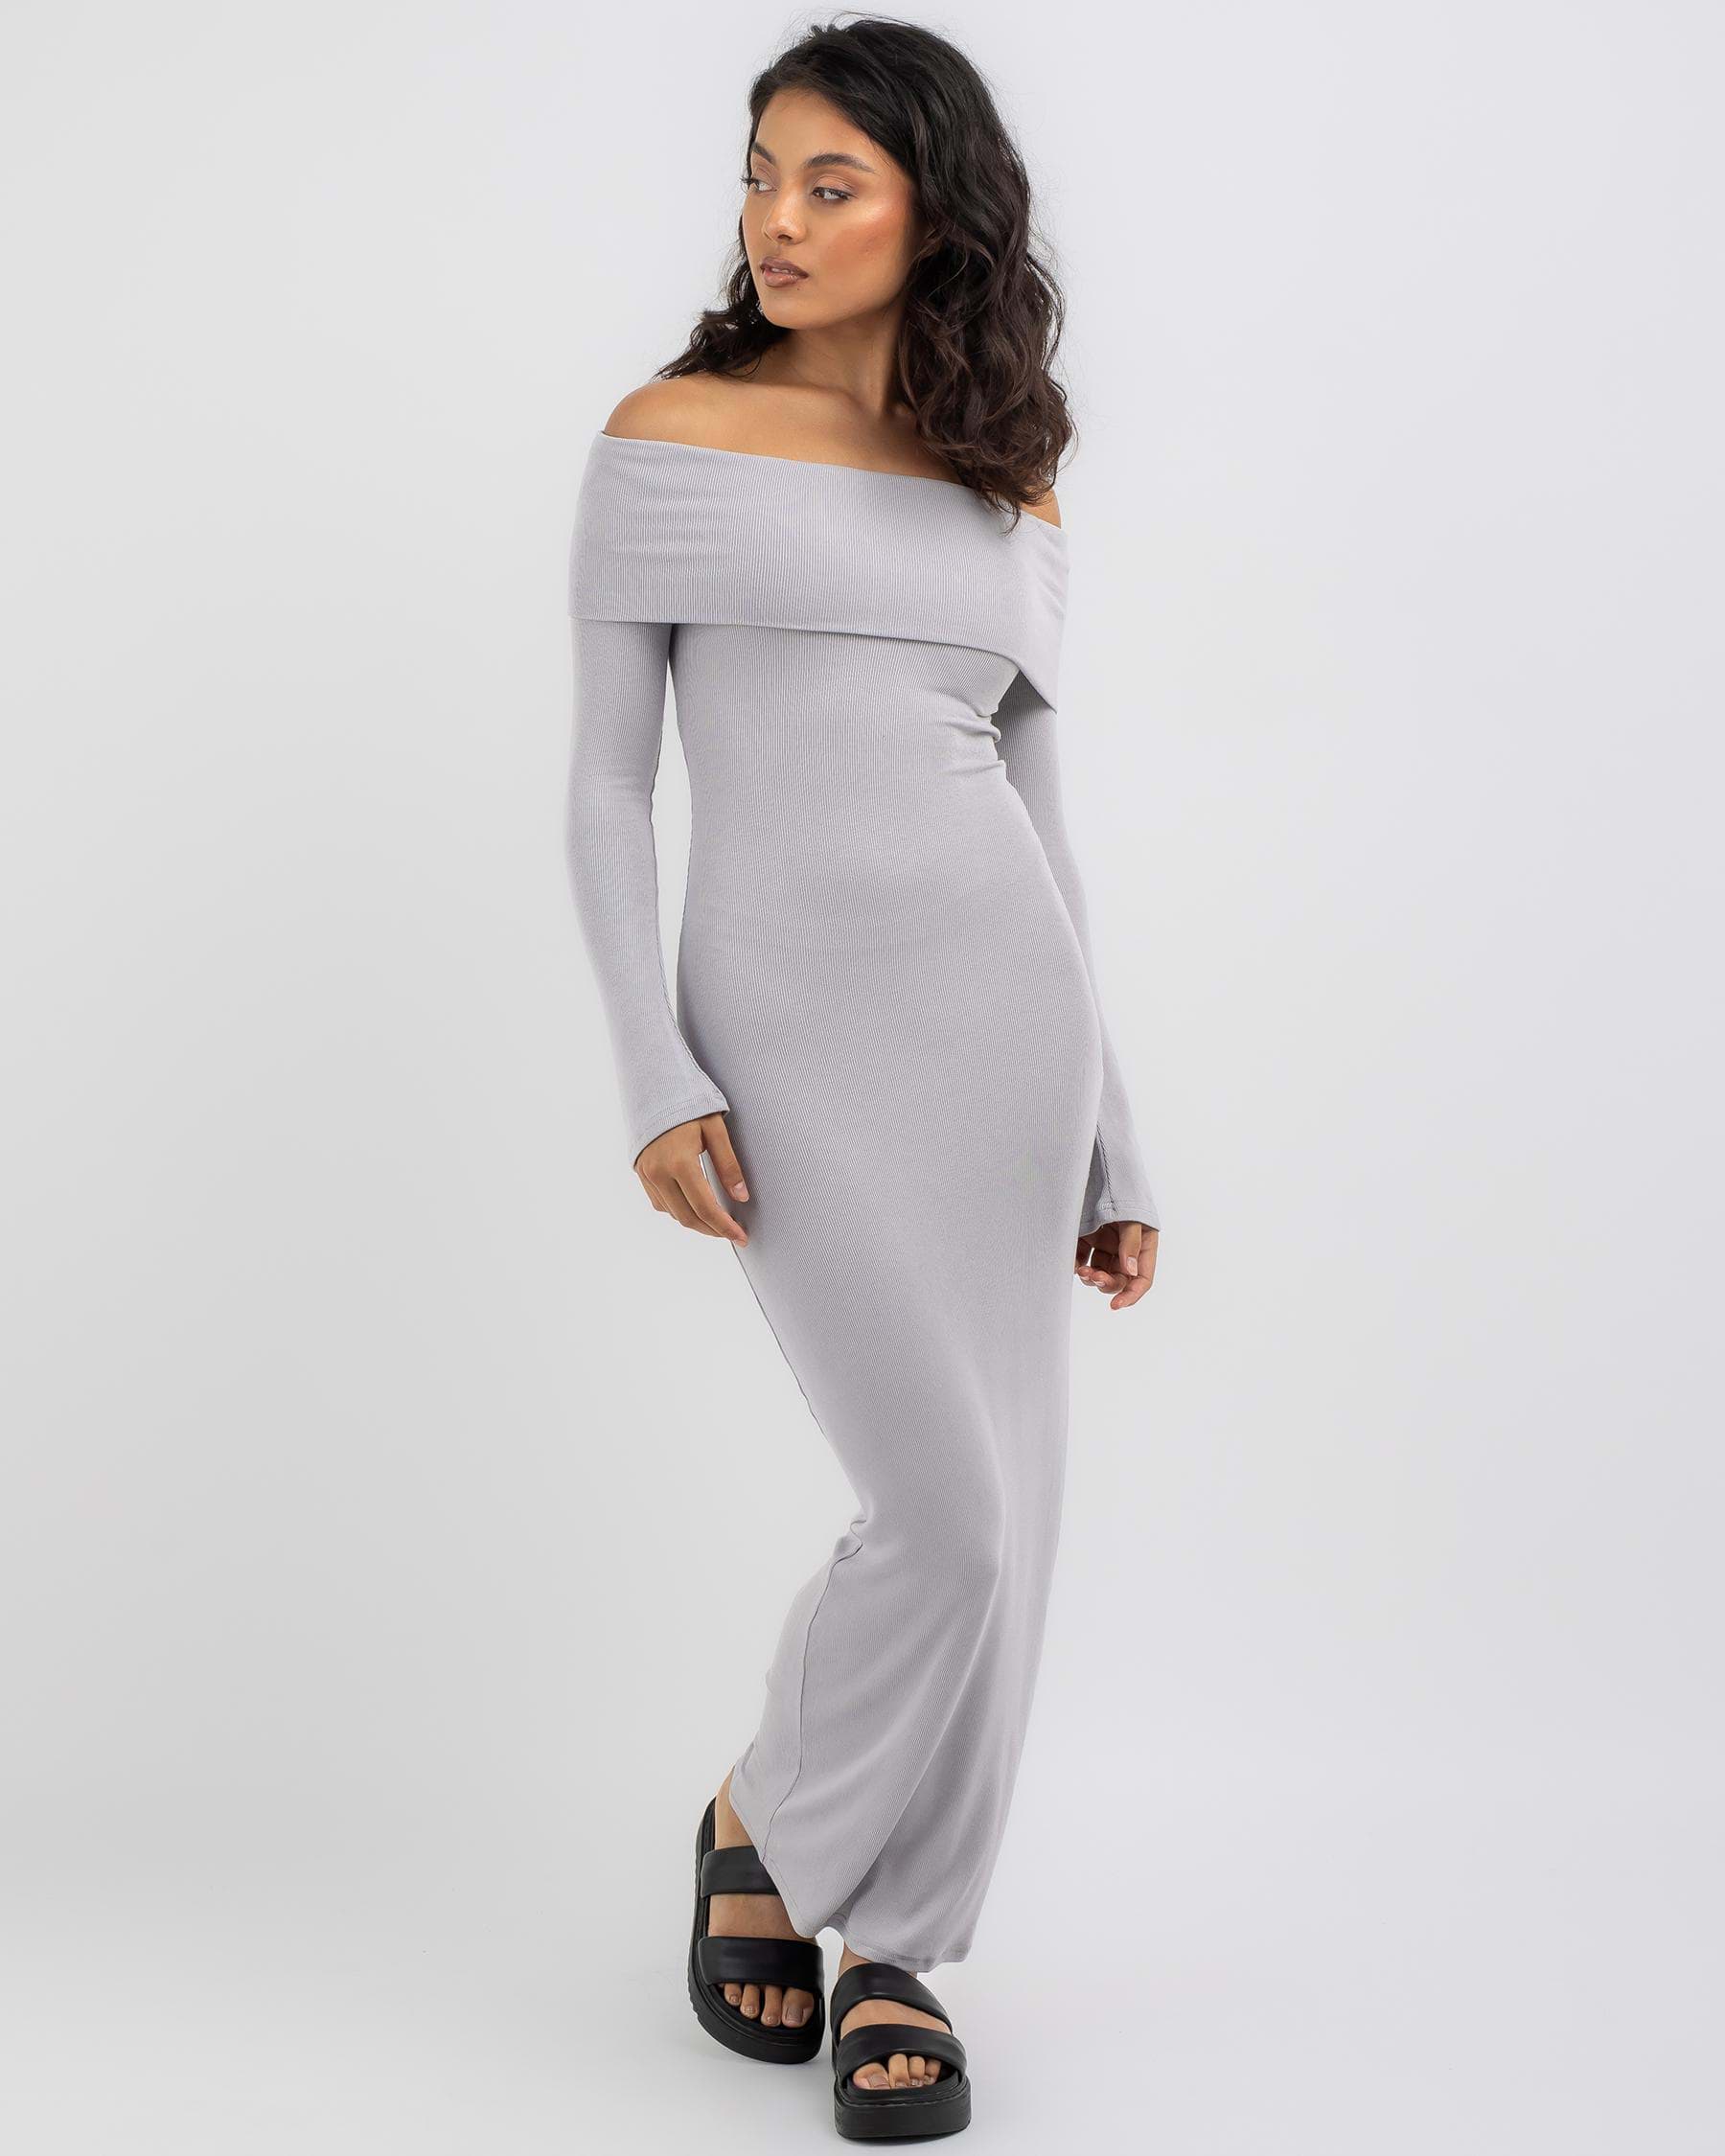 Ava And Ever Misty Maxi Dress In Grey - FREE* Shipping & Easy Returns ...